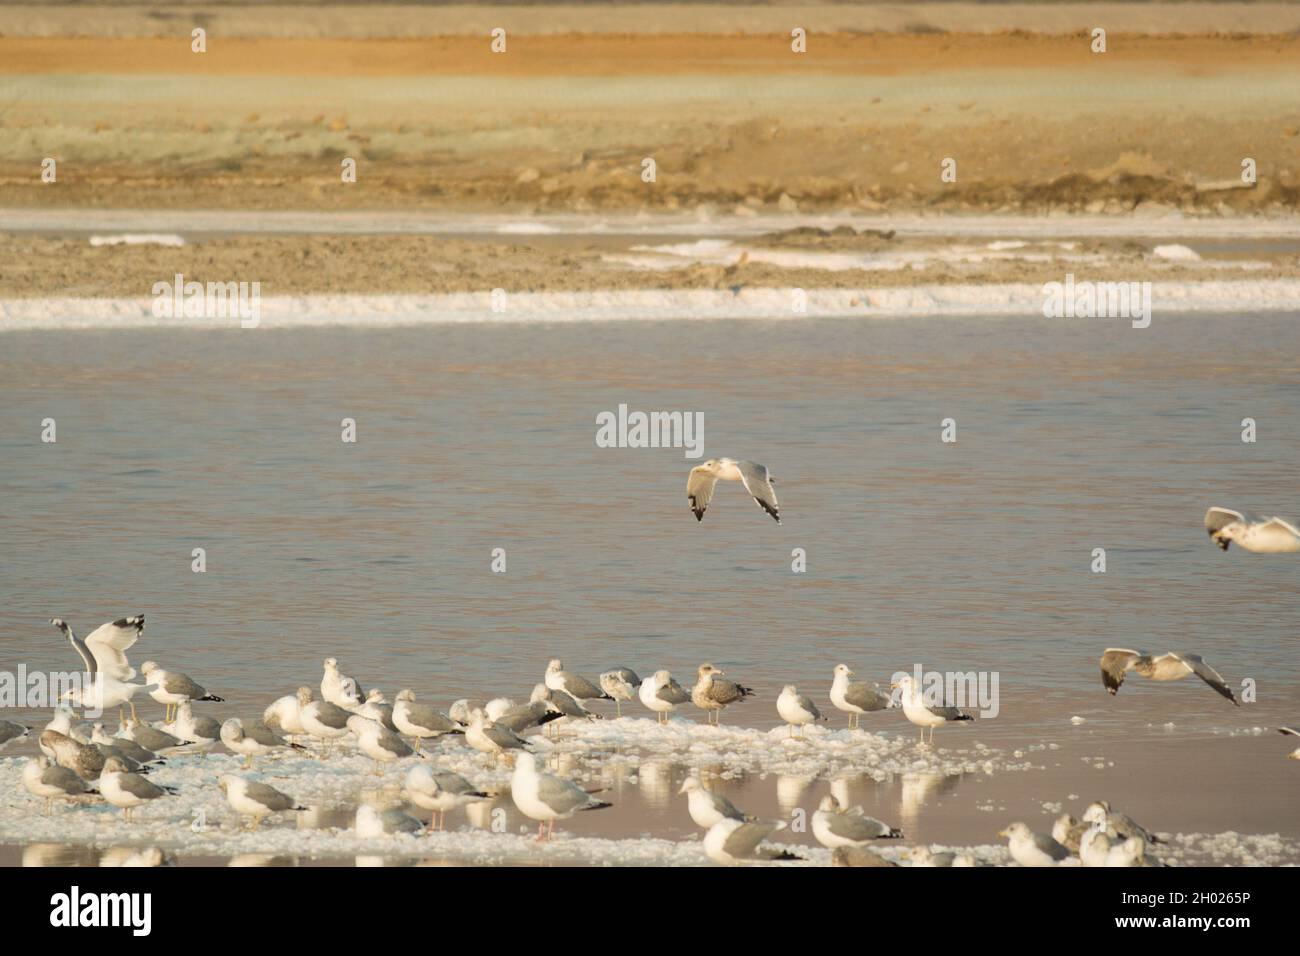 Many gulls sitting and standing on salt islands at dusk in pond A15 at Alviso Marina County Park, part of the Don Edwards National Wildlife Refuge Stock Photo